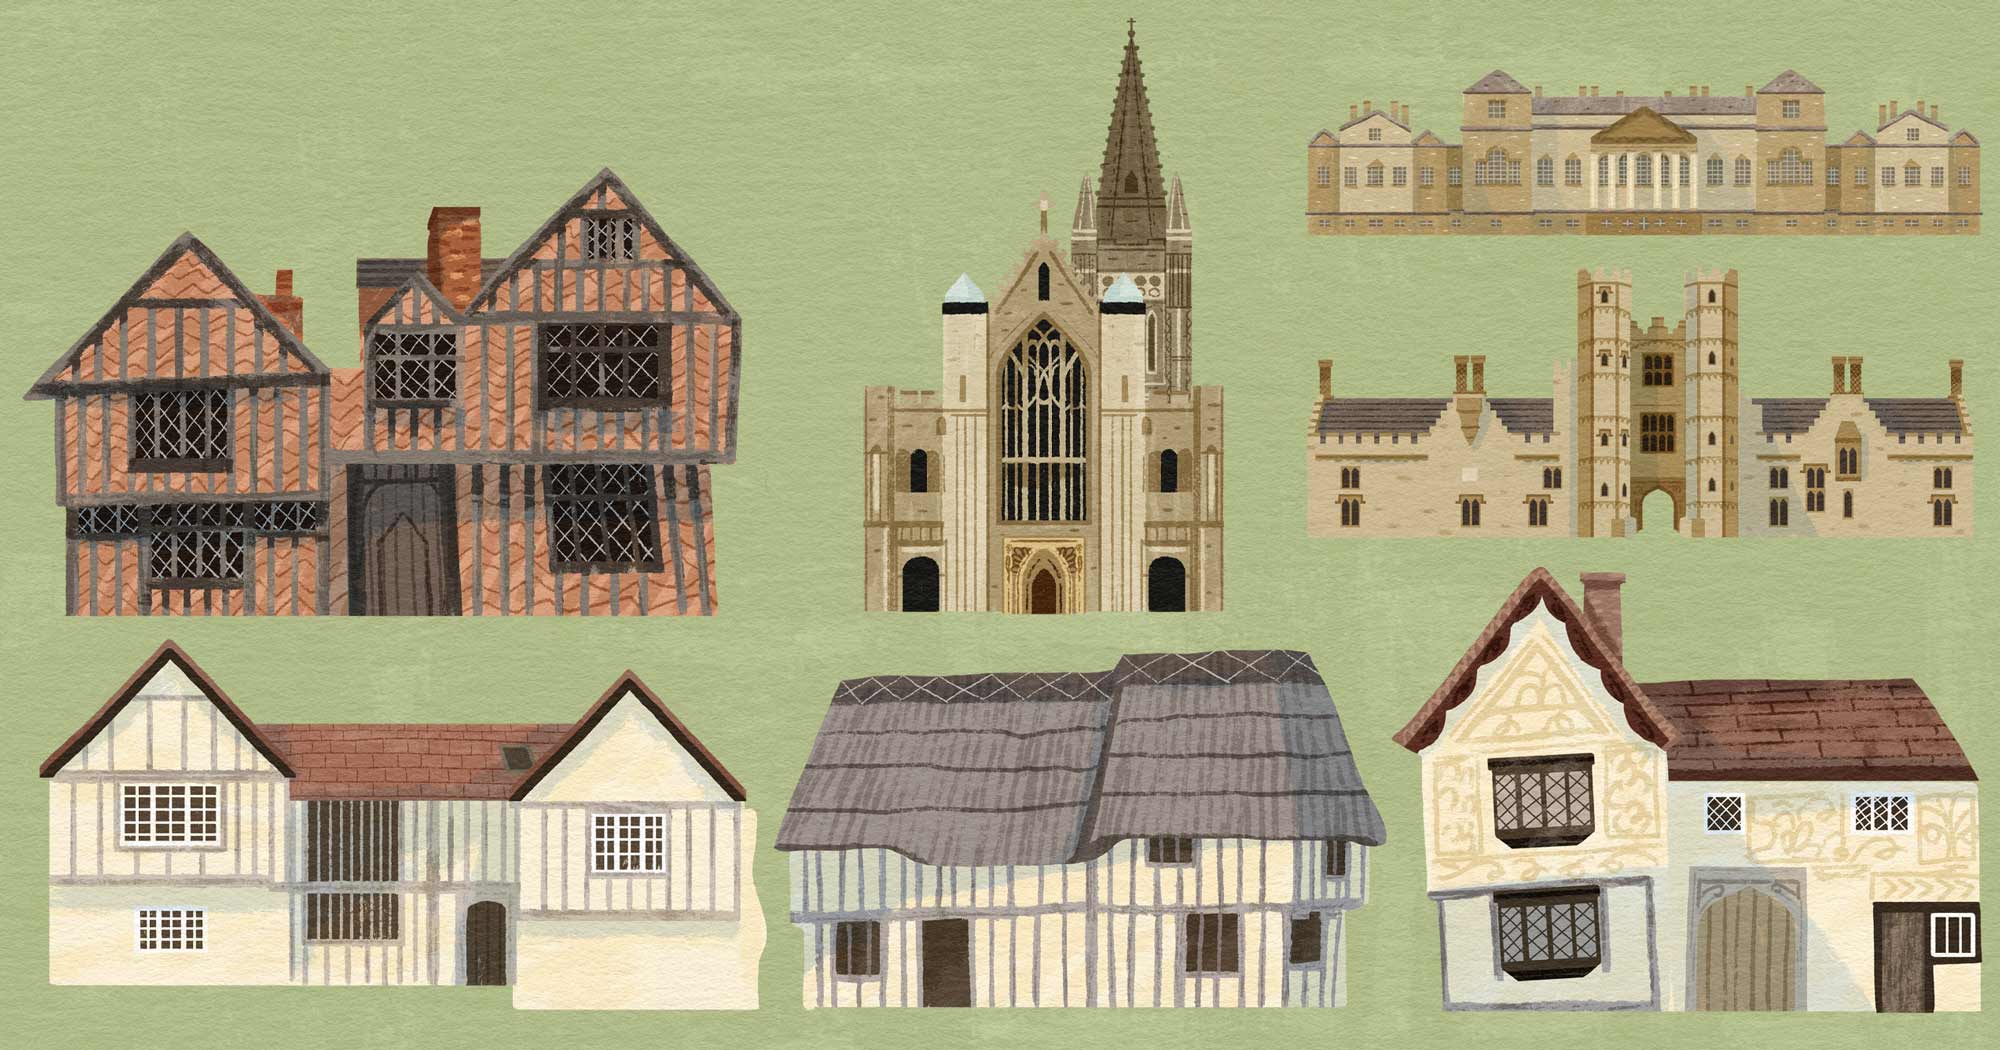 Some of the buildings from my map of eastern England for Discover Britain by Elly Jahnz